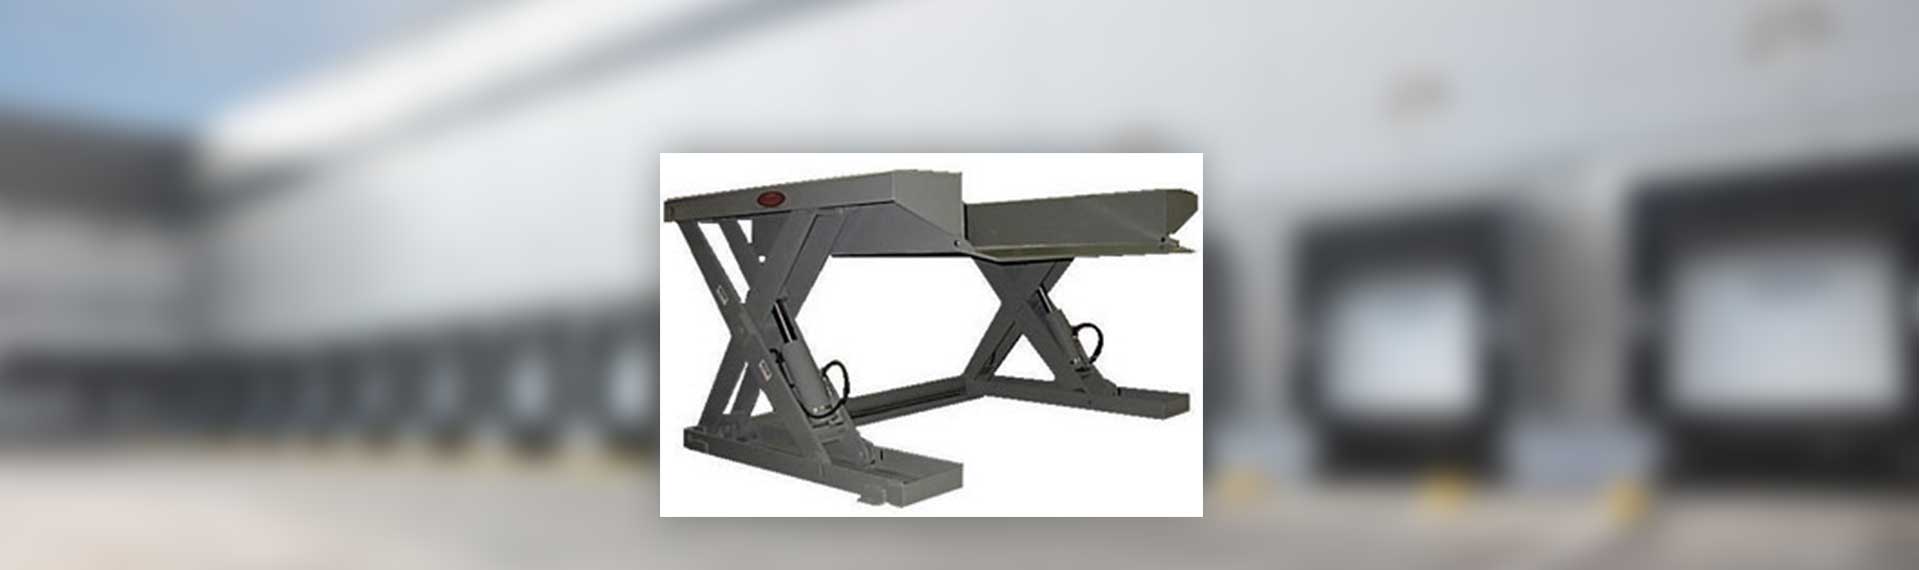 YARD-RAMP-SITE low entry lift tables